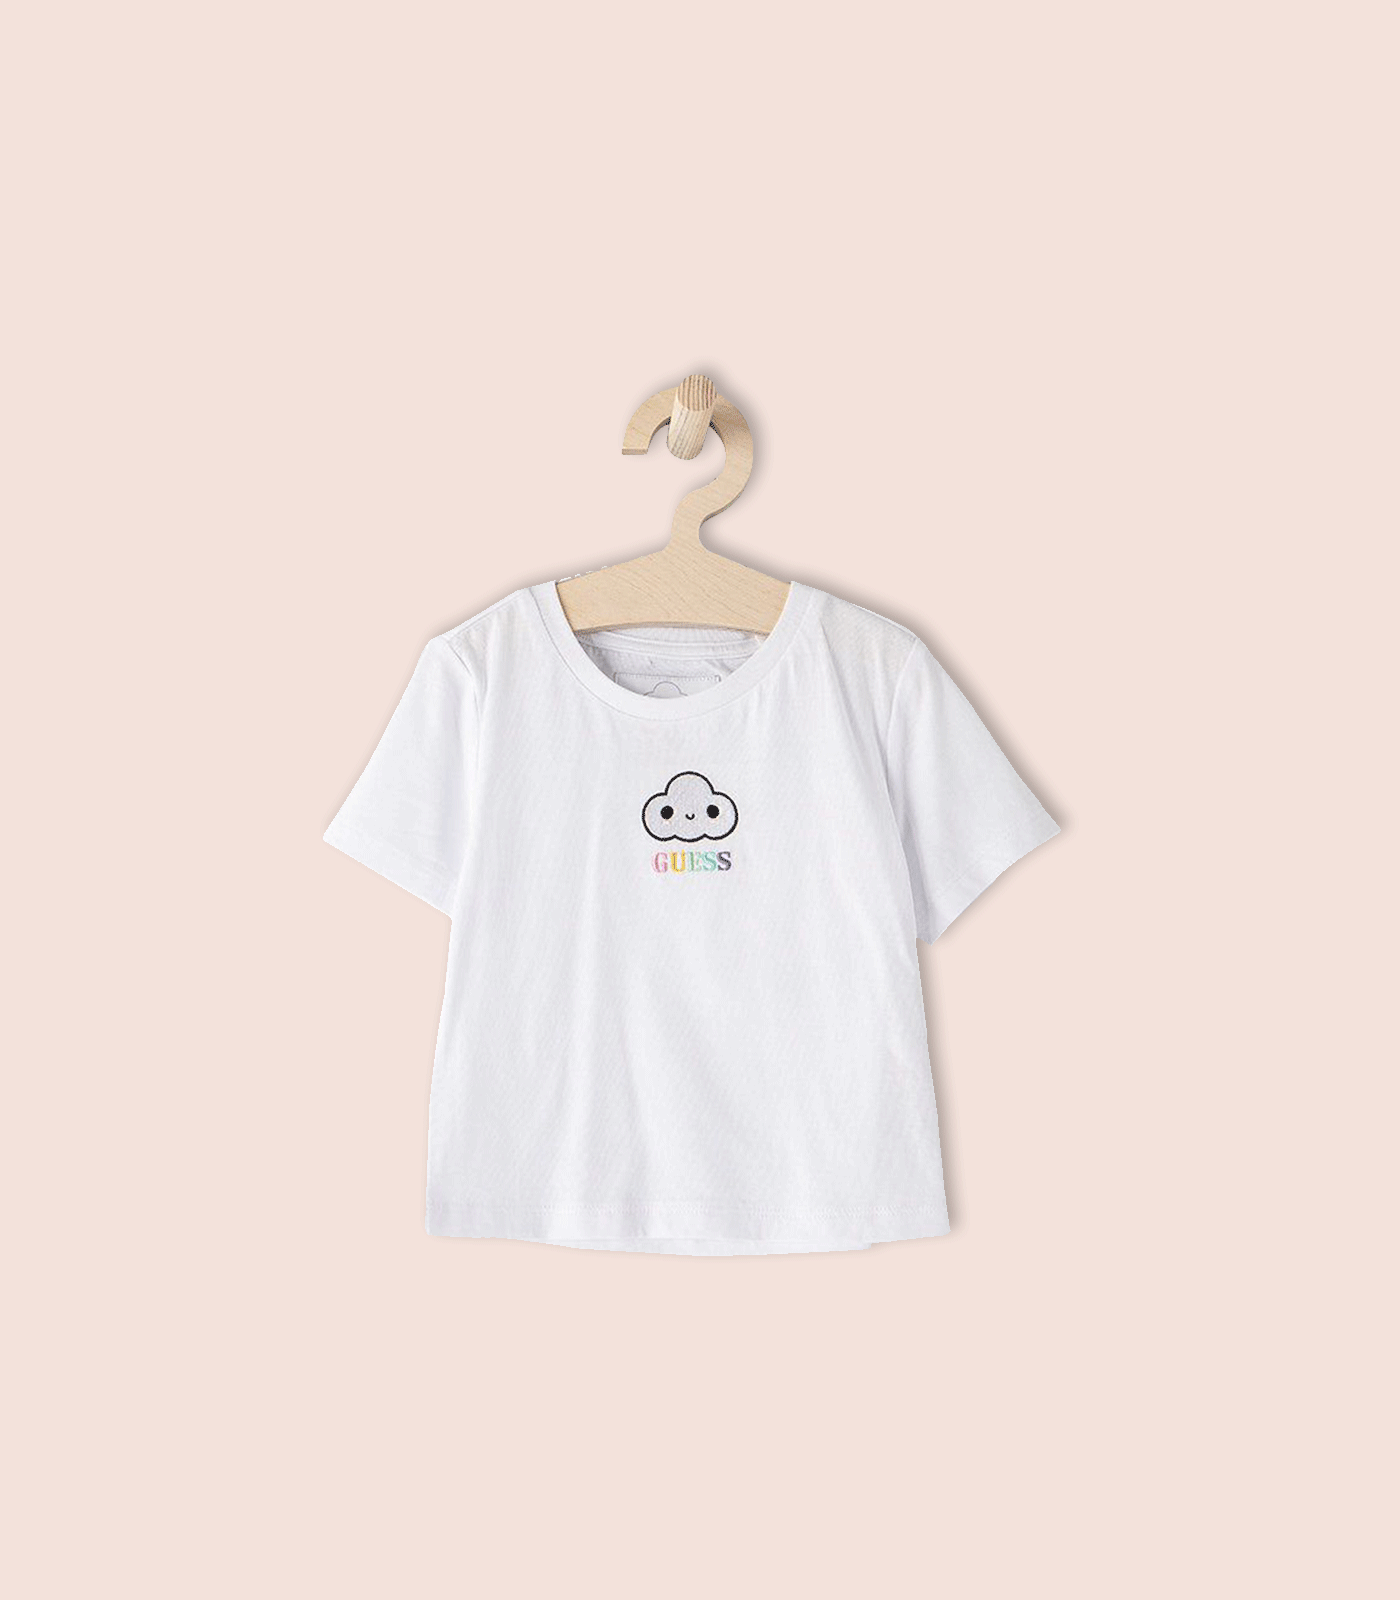 SOLID WHITE TEE WITH LOGO | GUESS KIDS | kidsup.in